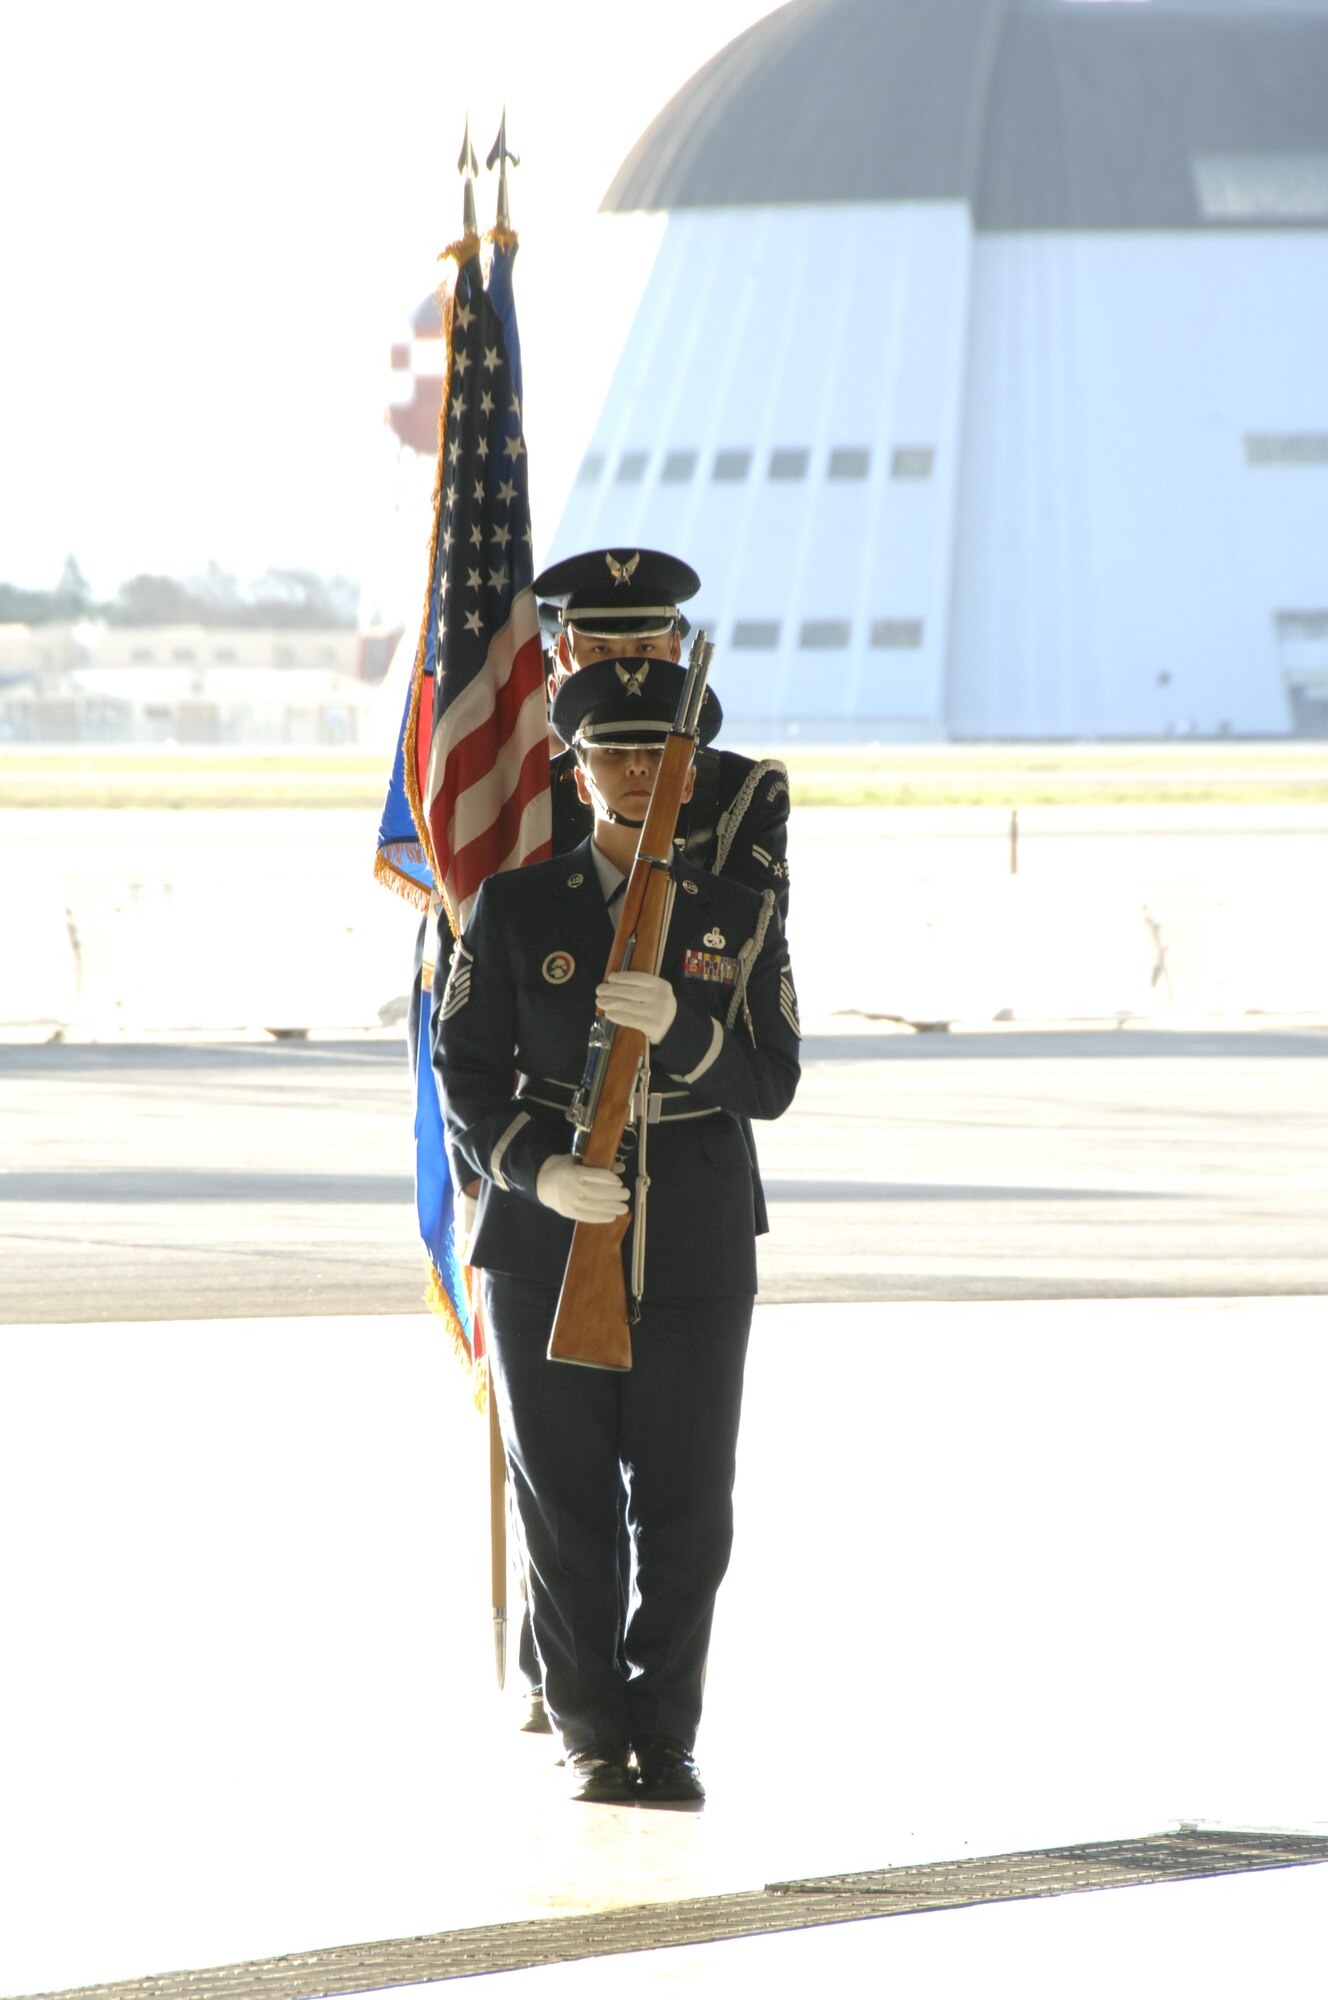 Base honor guard members from the 129th Rescue Wing, Moffett Federal Airfield, Calif., perform at a retirement ceremony at Moffett Field Feb. 7, 2009. (Air National Guard photo by Master Sgt. Dan Kacir)(RELEASED)